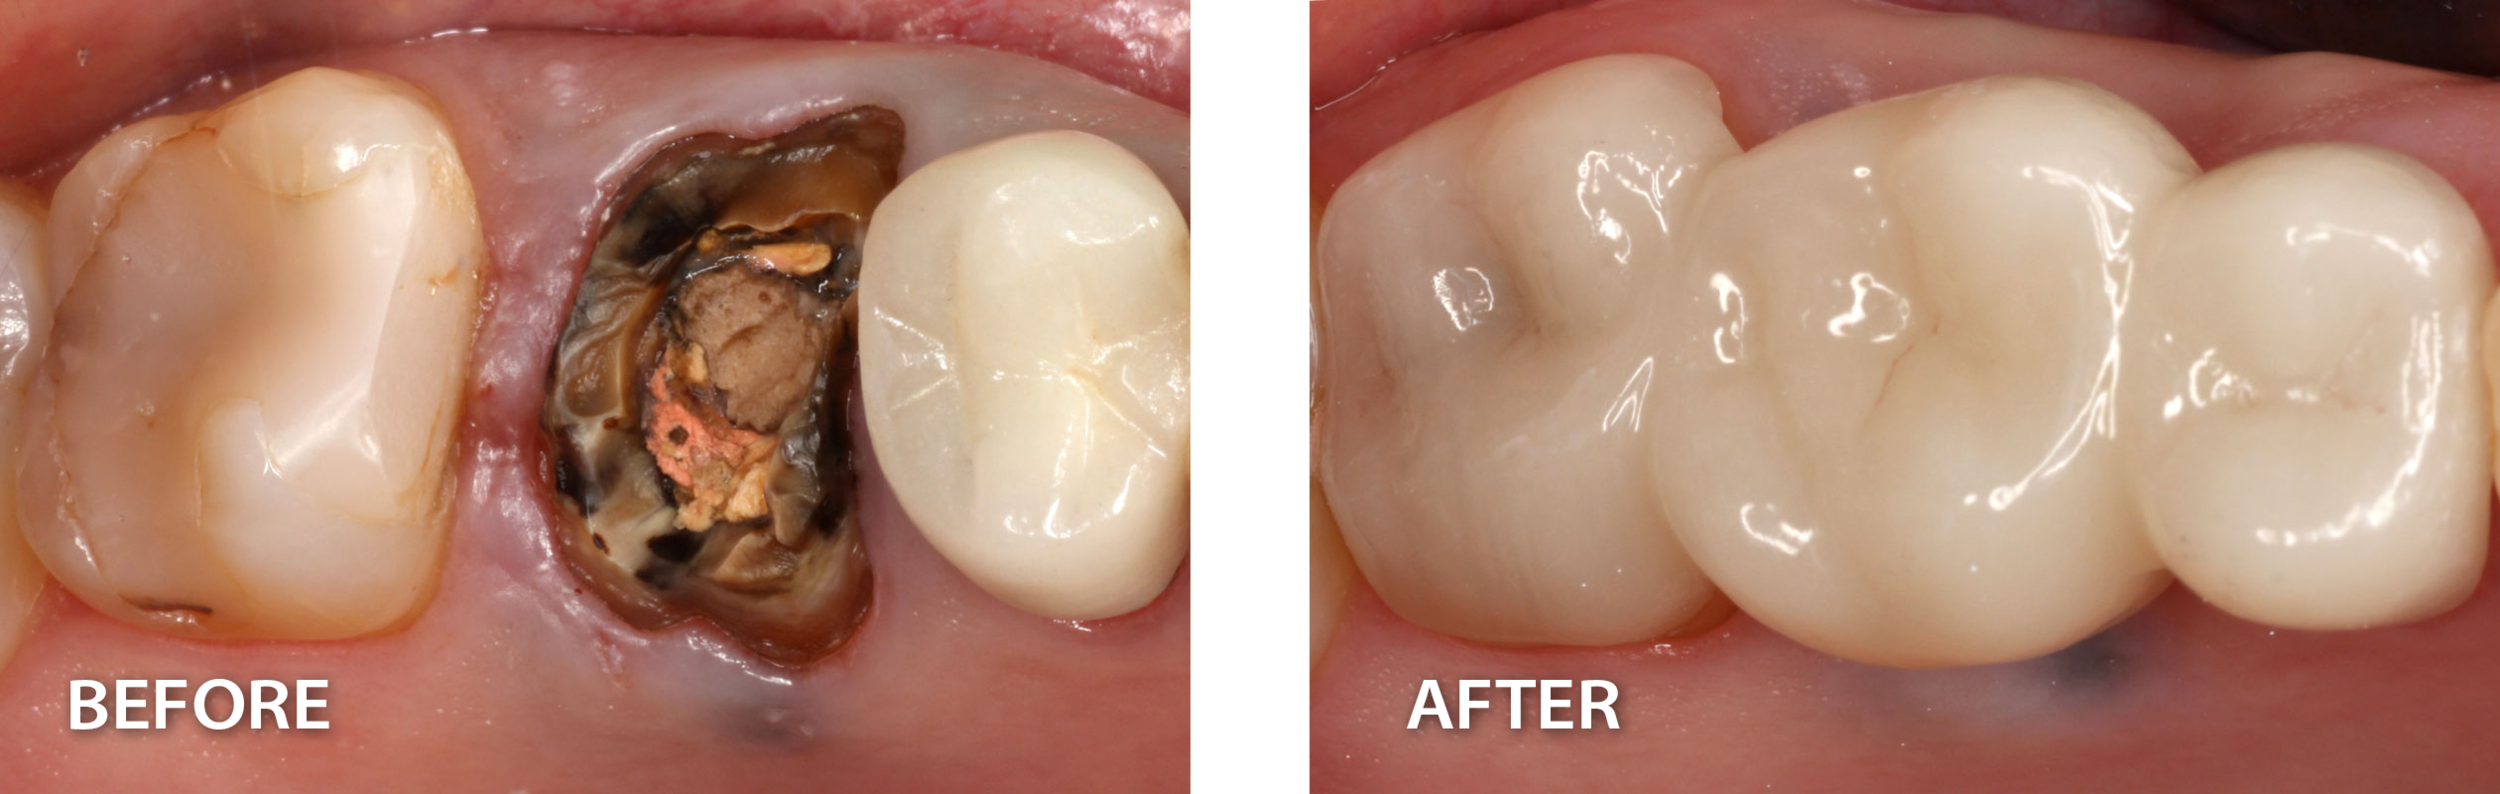  before image of a missing tooth with exposed roots beside an after image of a new tooth replacing the missing one after dental procedure 